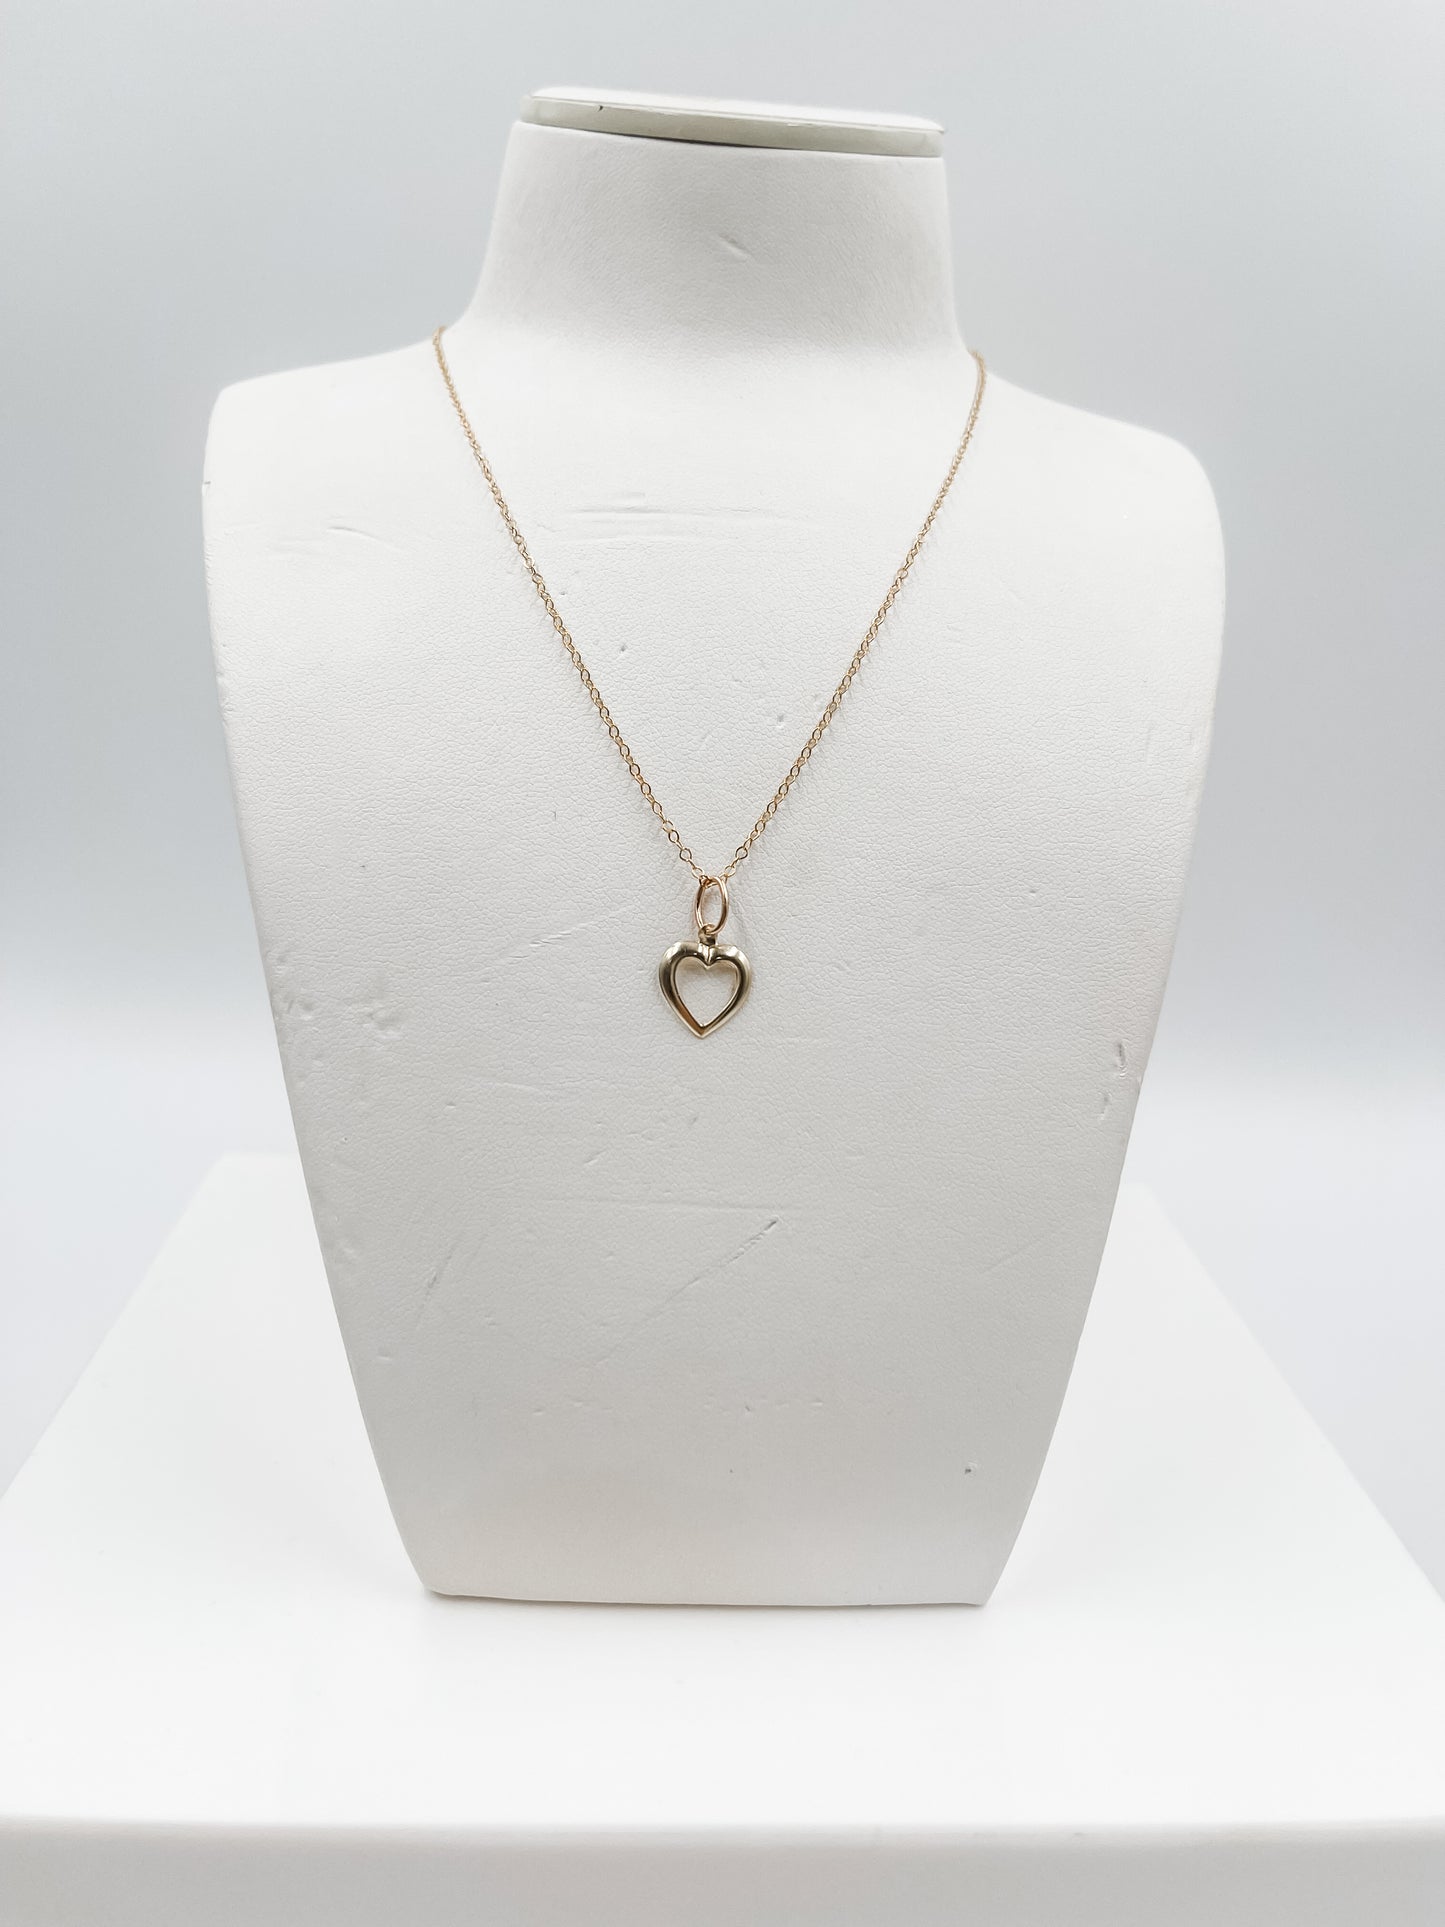 From the Heart Necklace